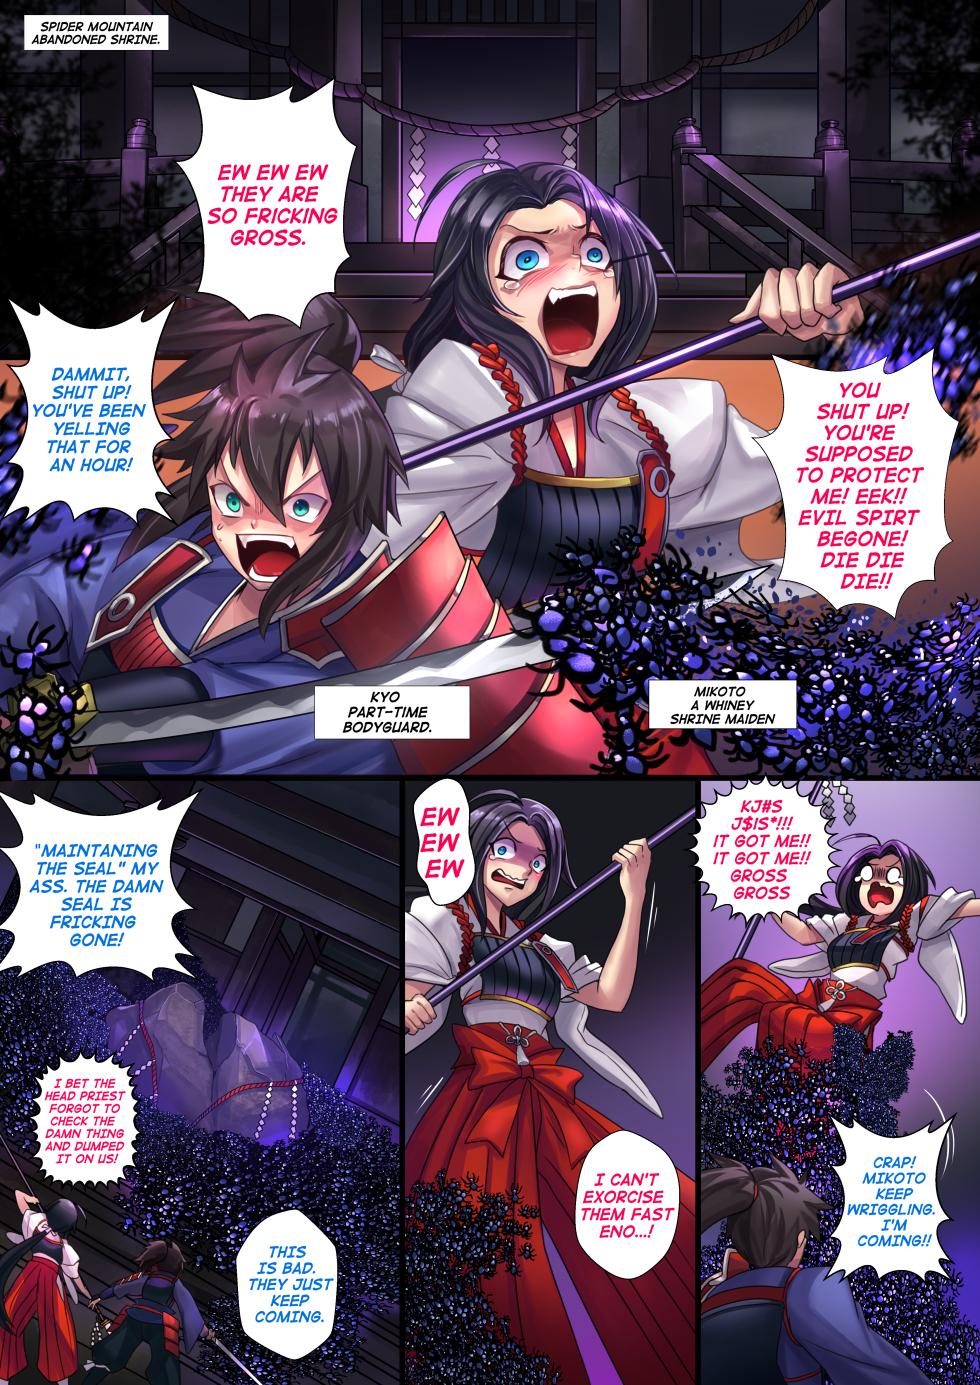 [ibenz009] Miko Spider Corruption [ENG] - Page 1